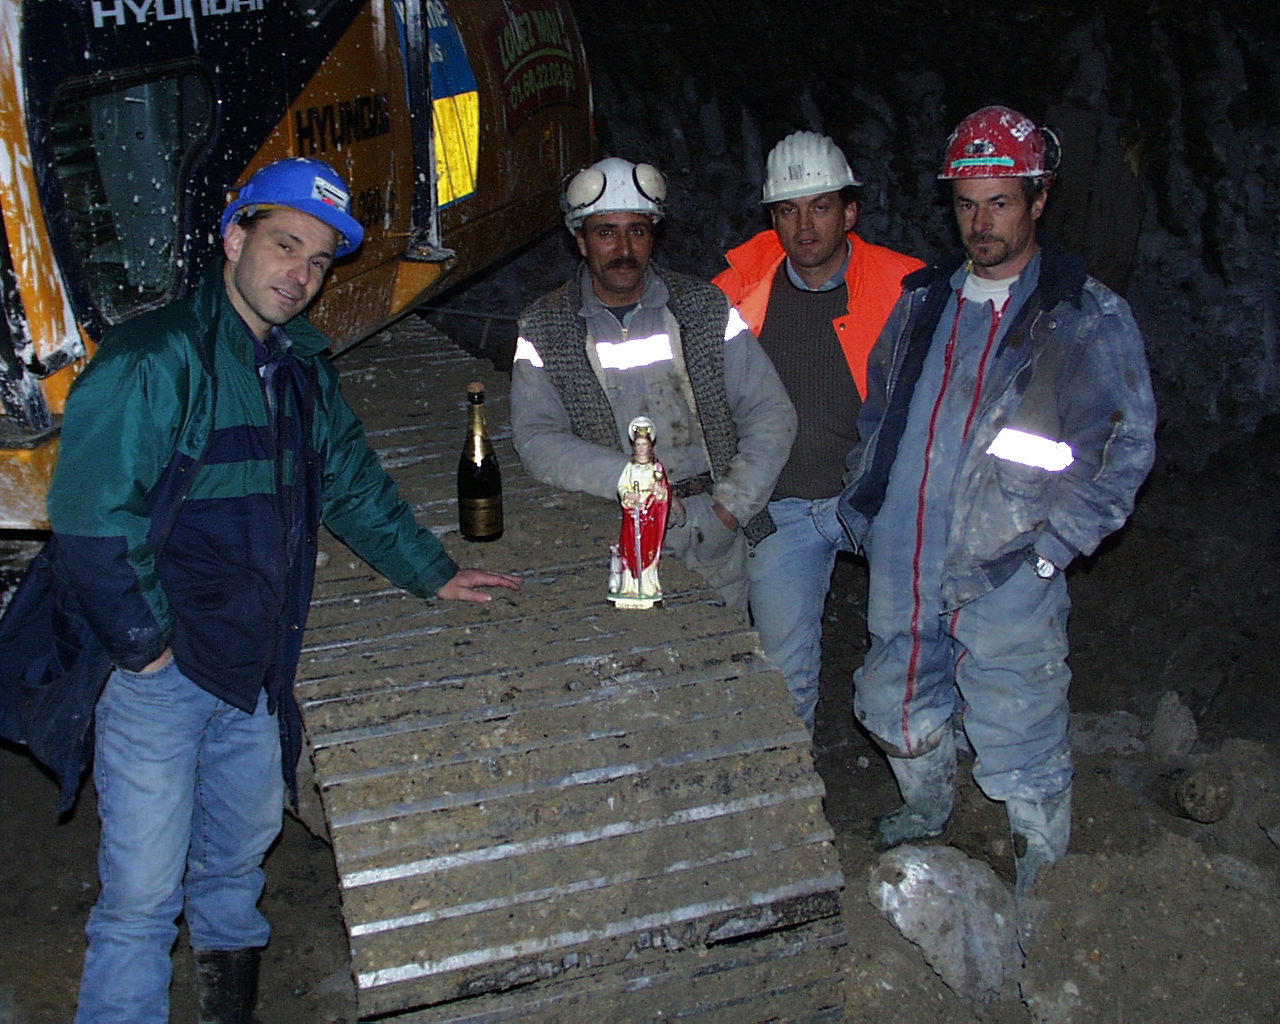 Image 1: The on-site workers with the idol of St. Barbara in 1999.